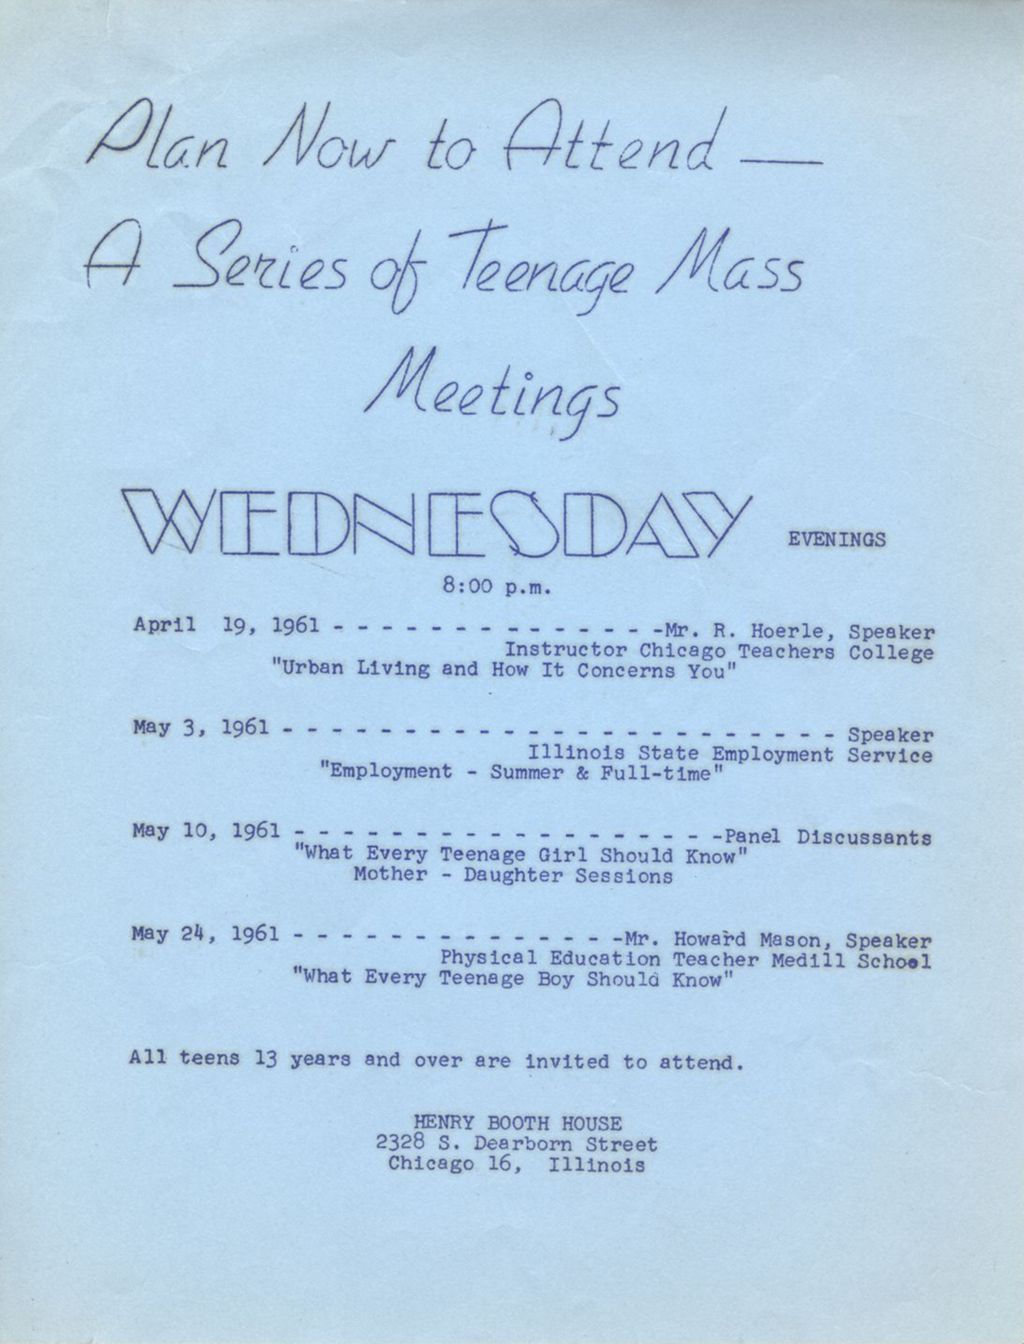 Miniature of Teenage Mass Meetings flyer, Henry Booth House